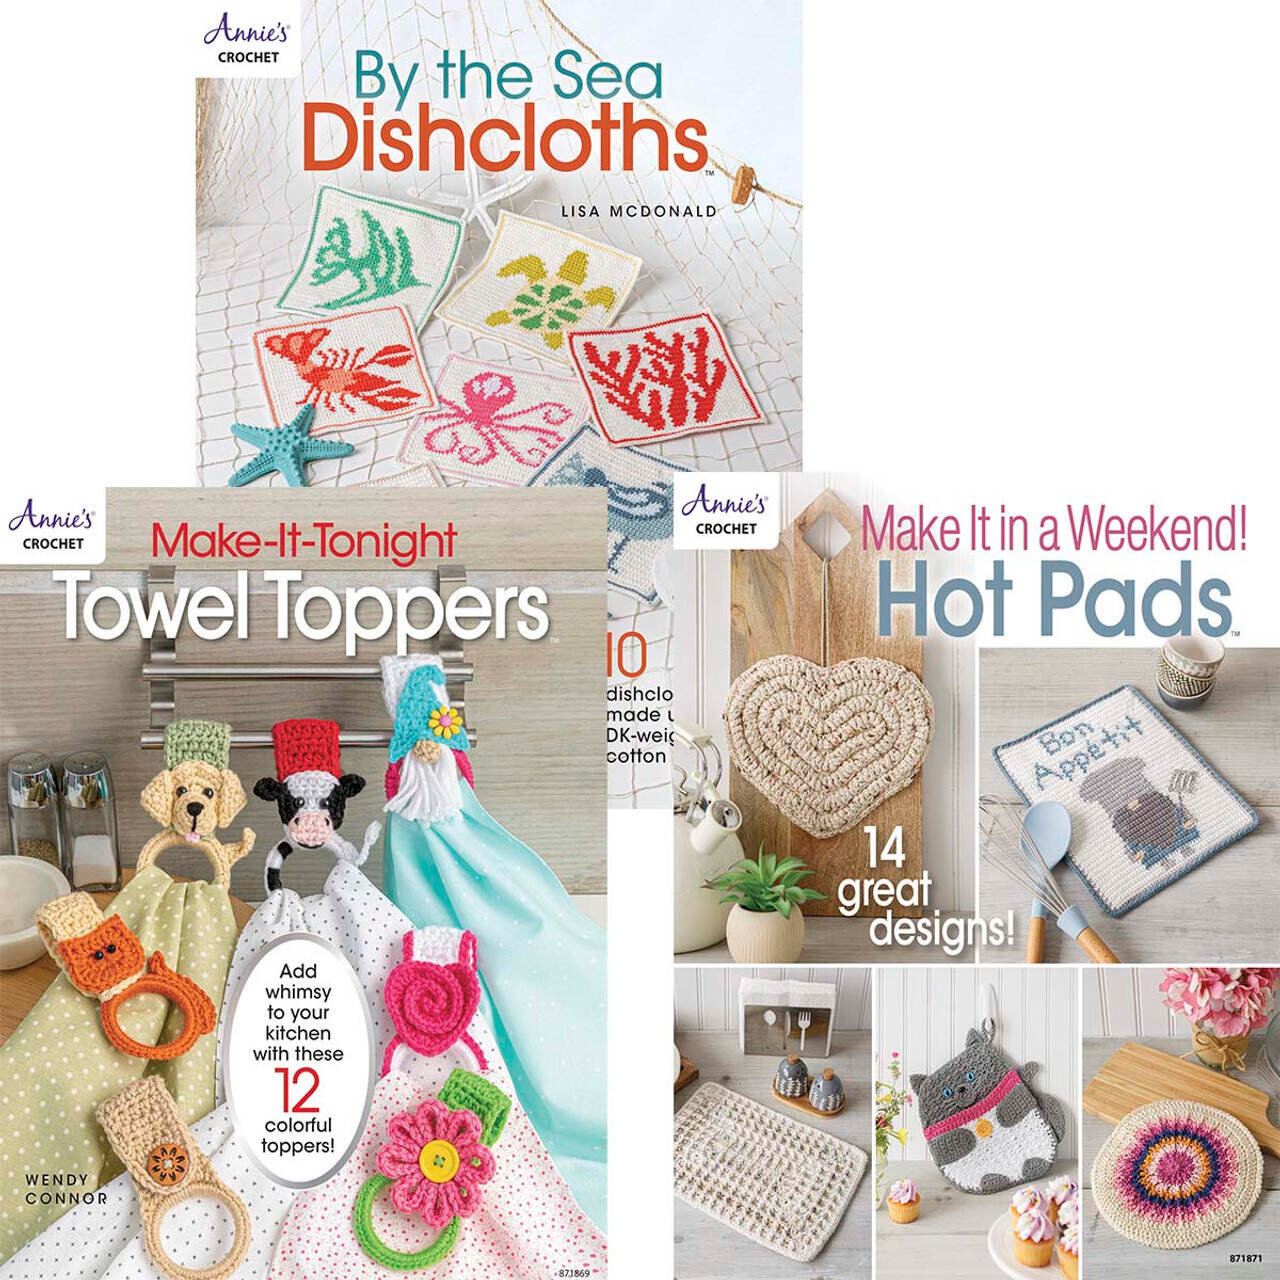 Annie's Dishcloths, Washcloths, Towel Toppers - BUY ALL 3